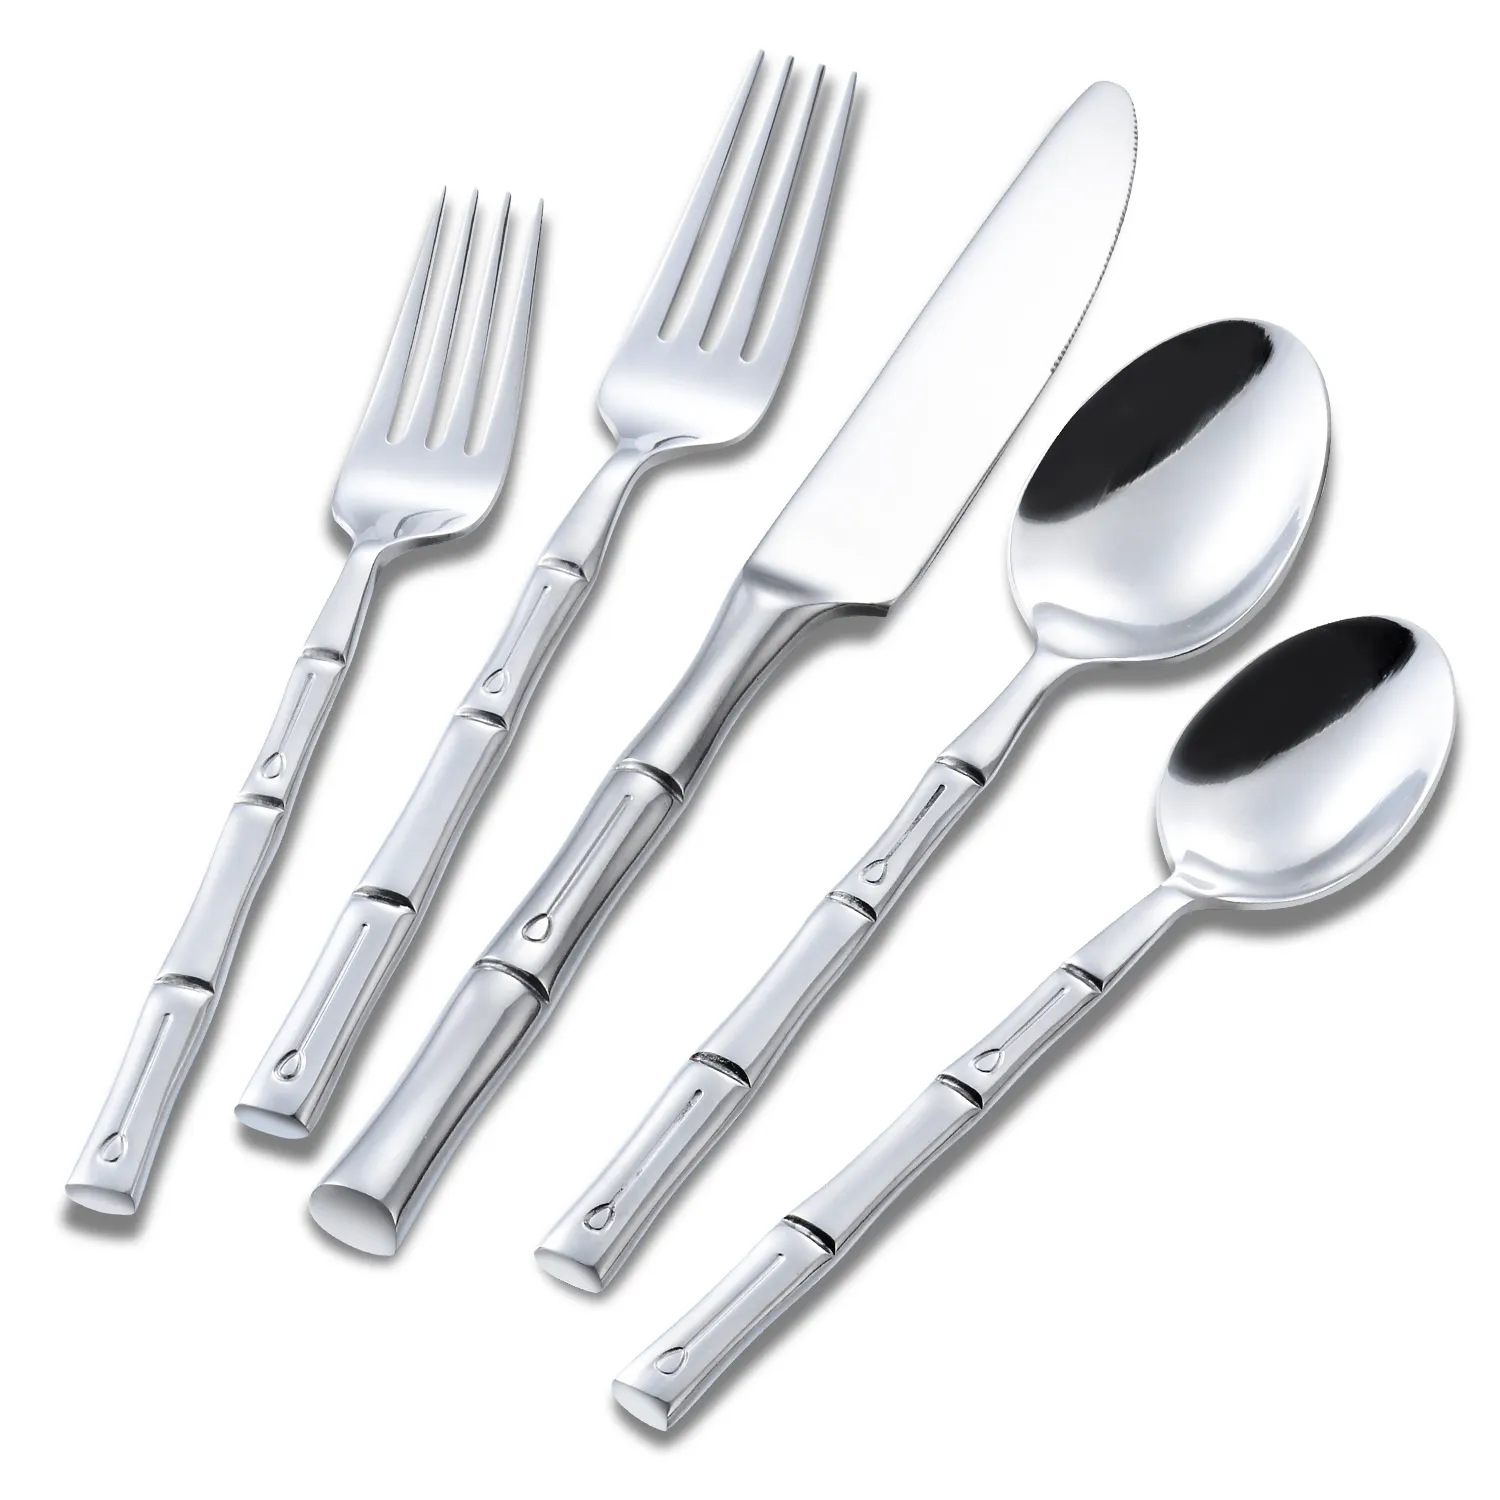 Wholesale 5 piece knife fork and spoon wedding cutlery bamboo style handle stainless steel flatware set